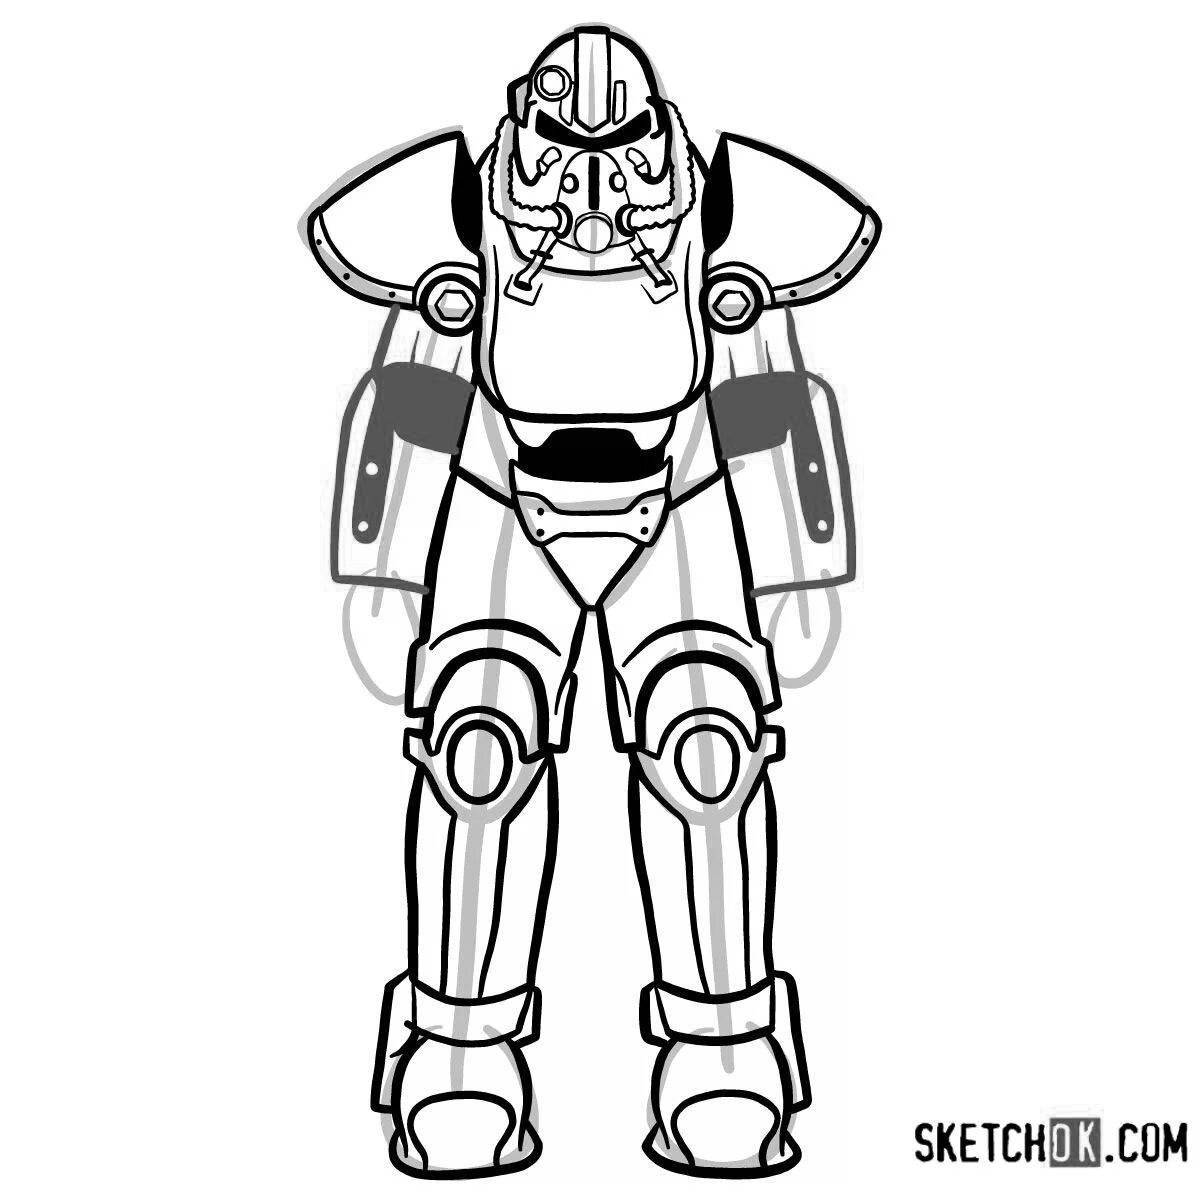 Fallout 4 power armor coloring page